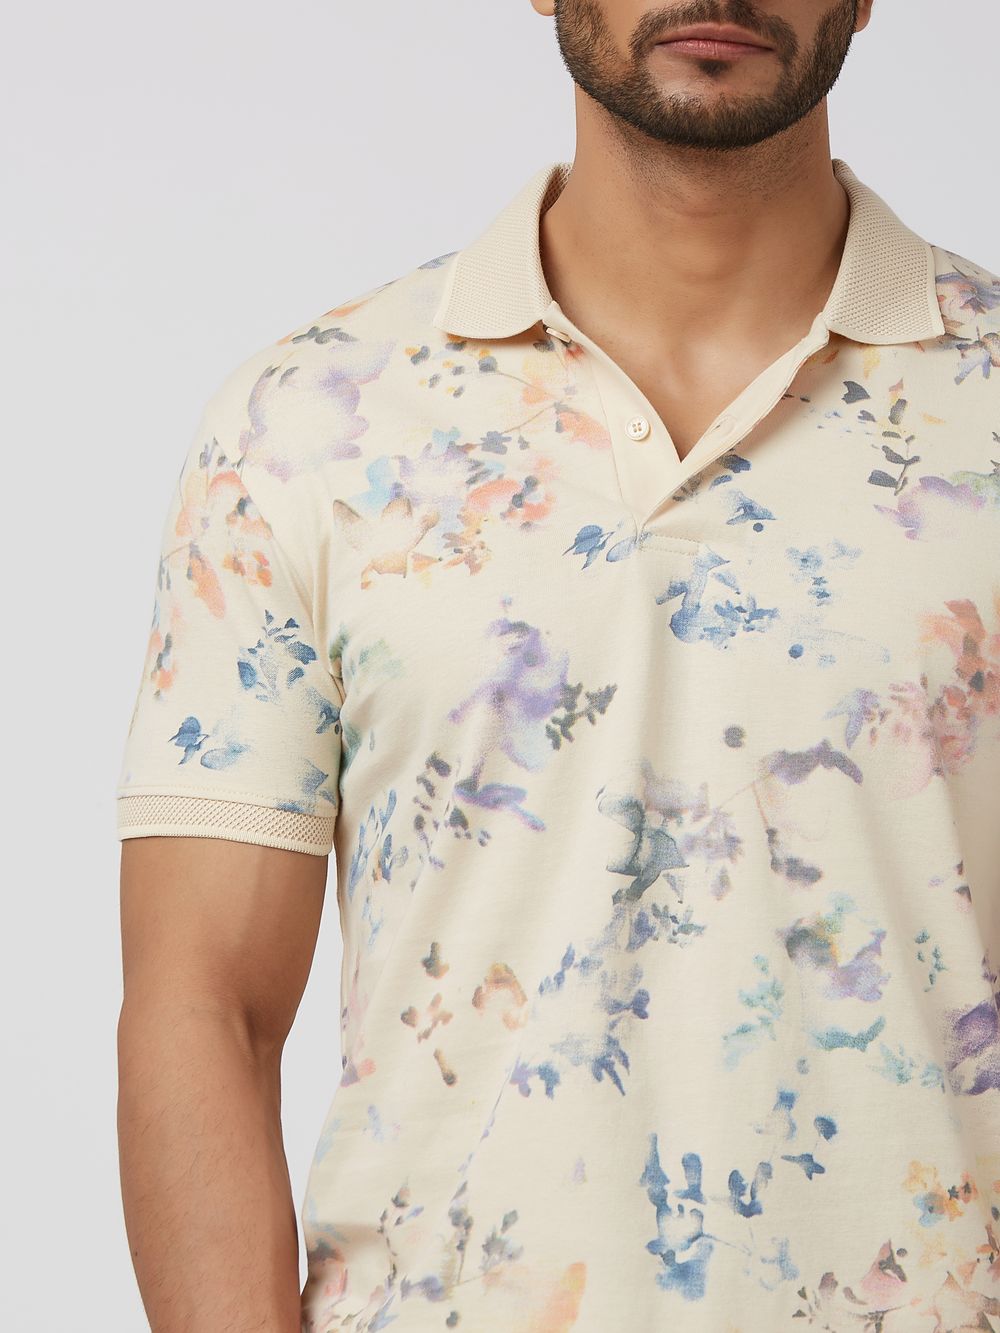 Off White Floral Print Slim Fit Polo